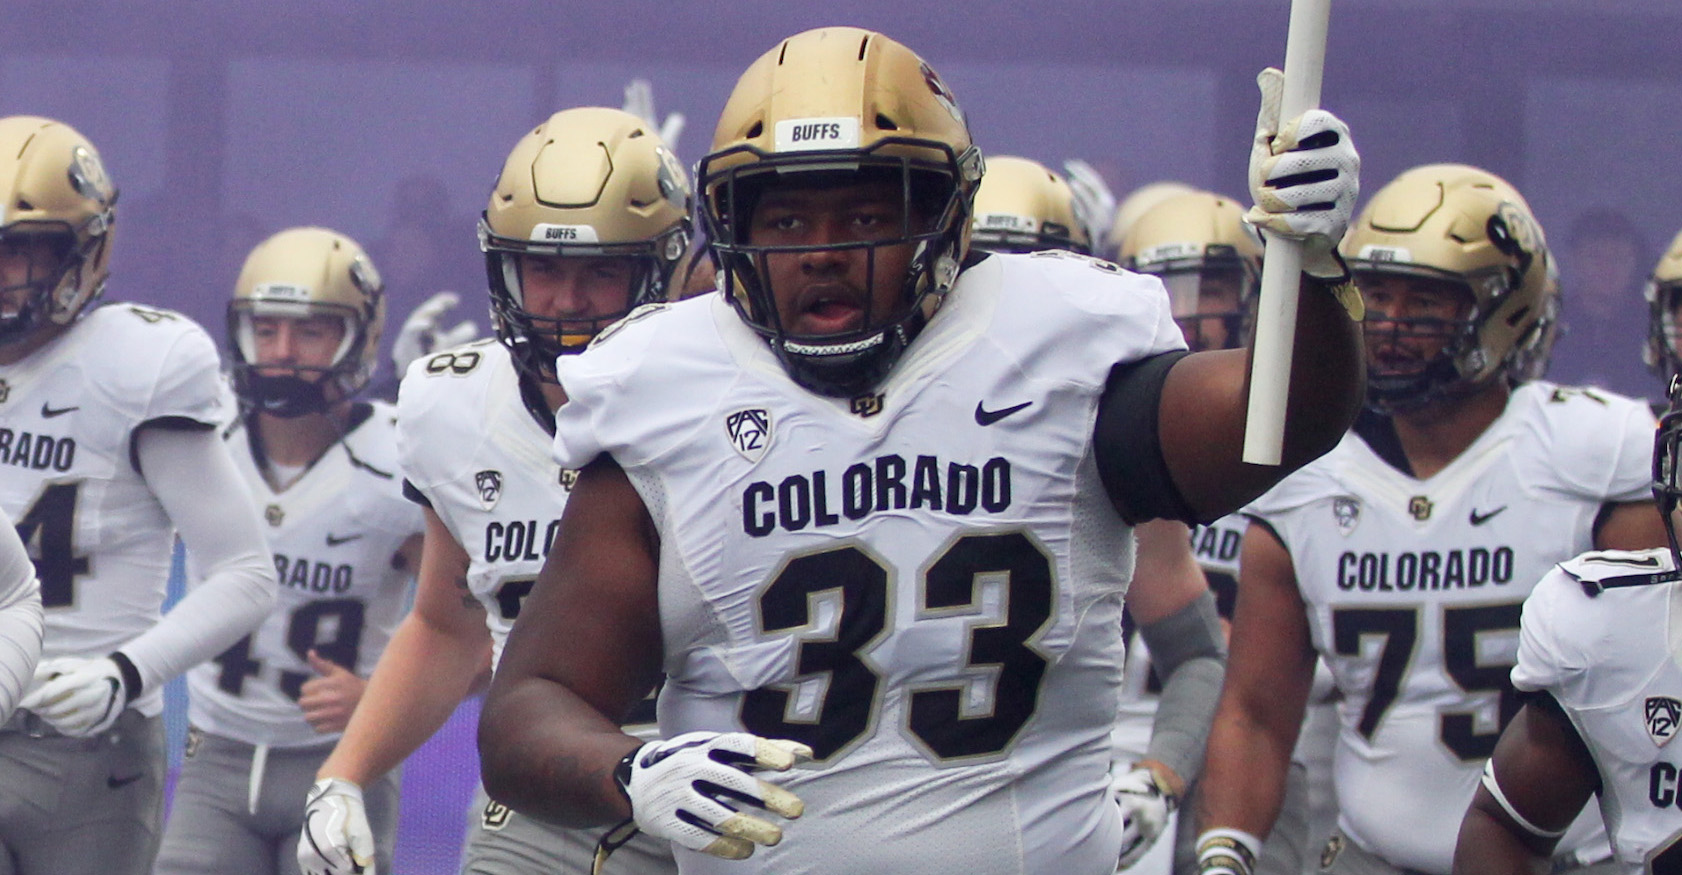 Texans' undrafted free agents include Colorado NT Javier Edwards